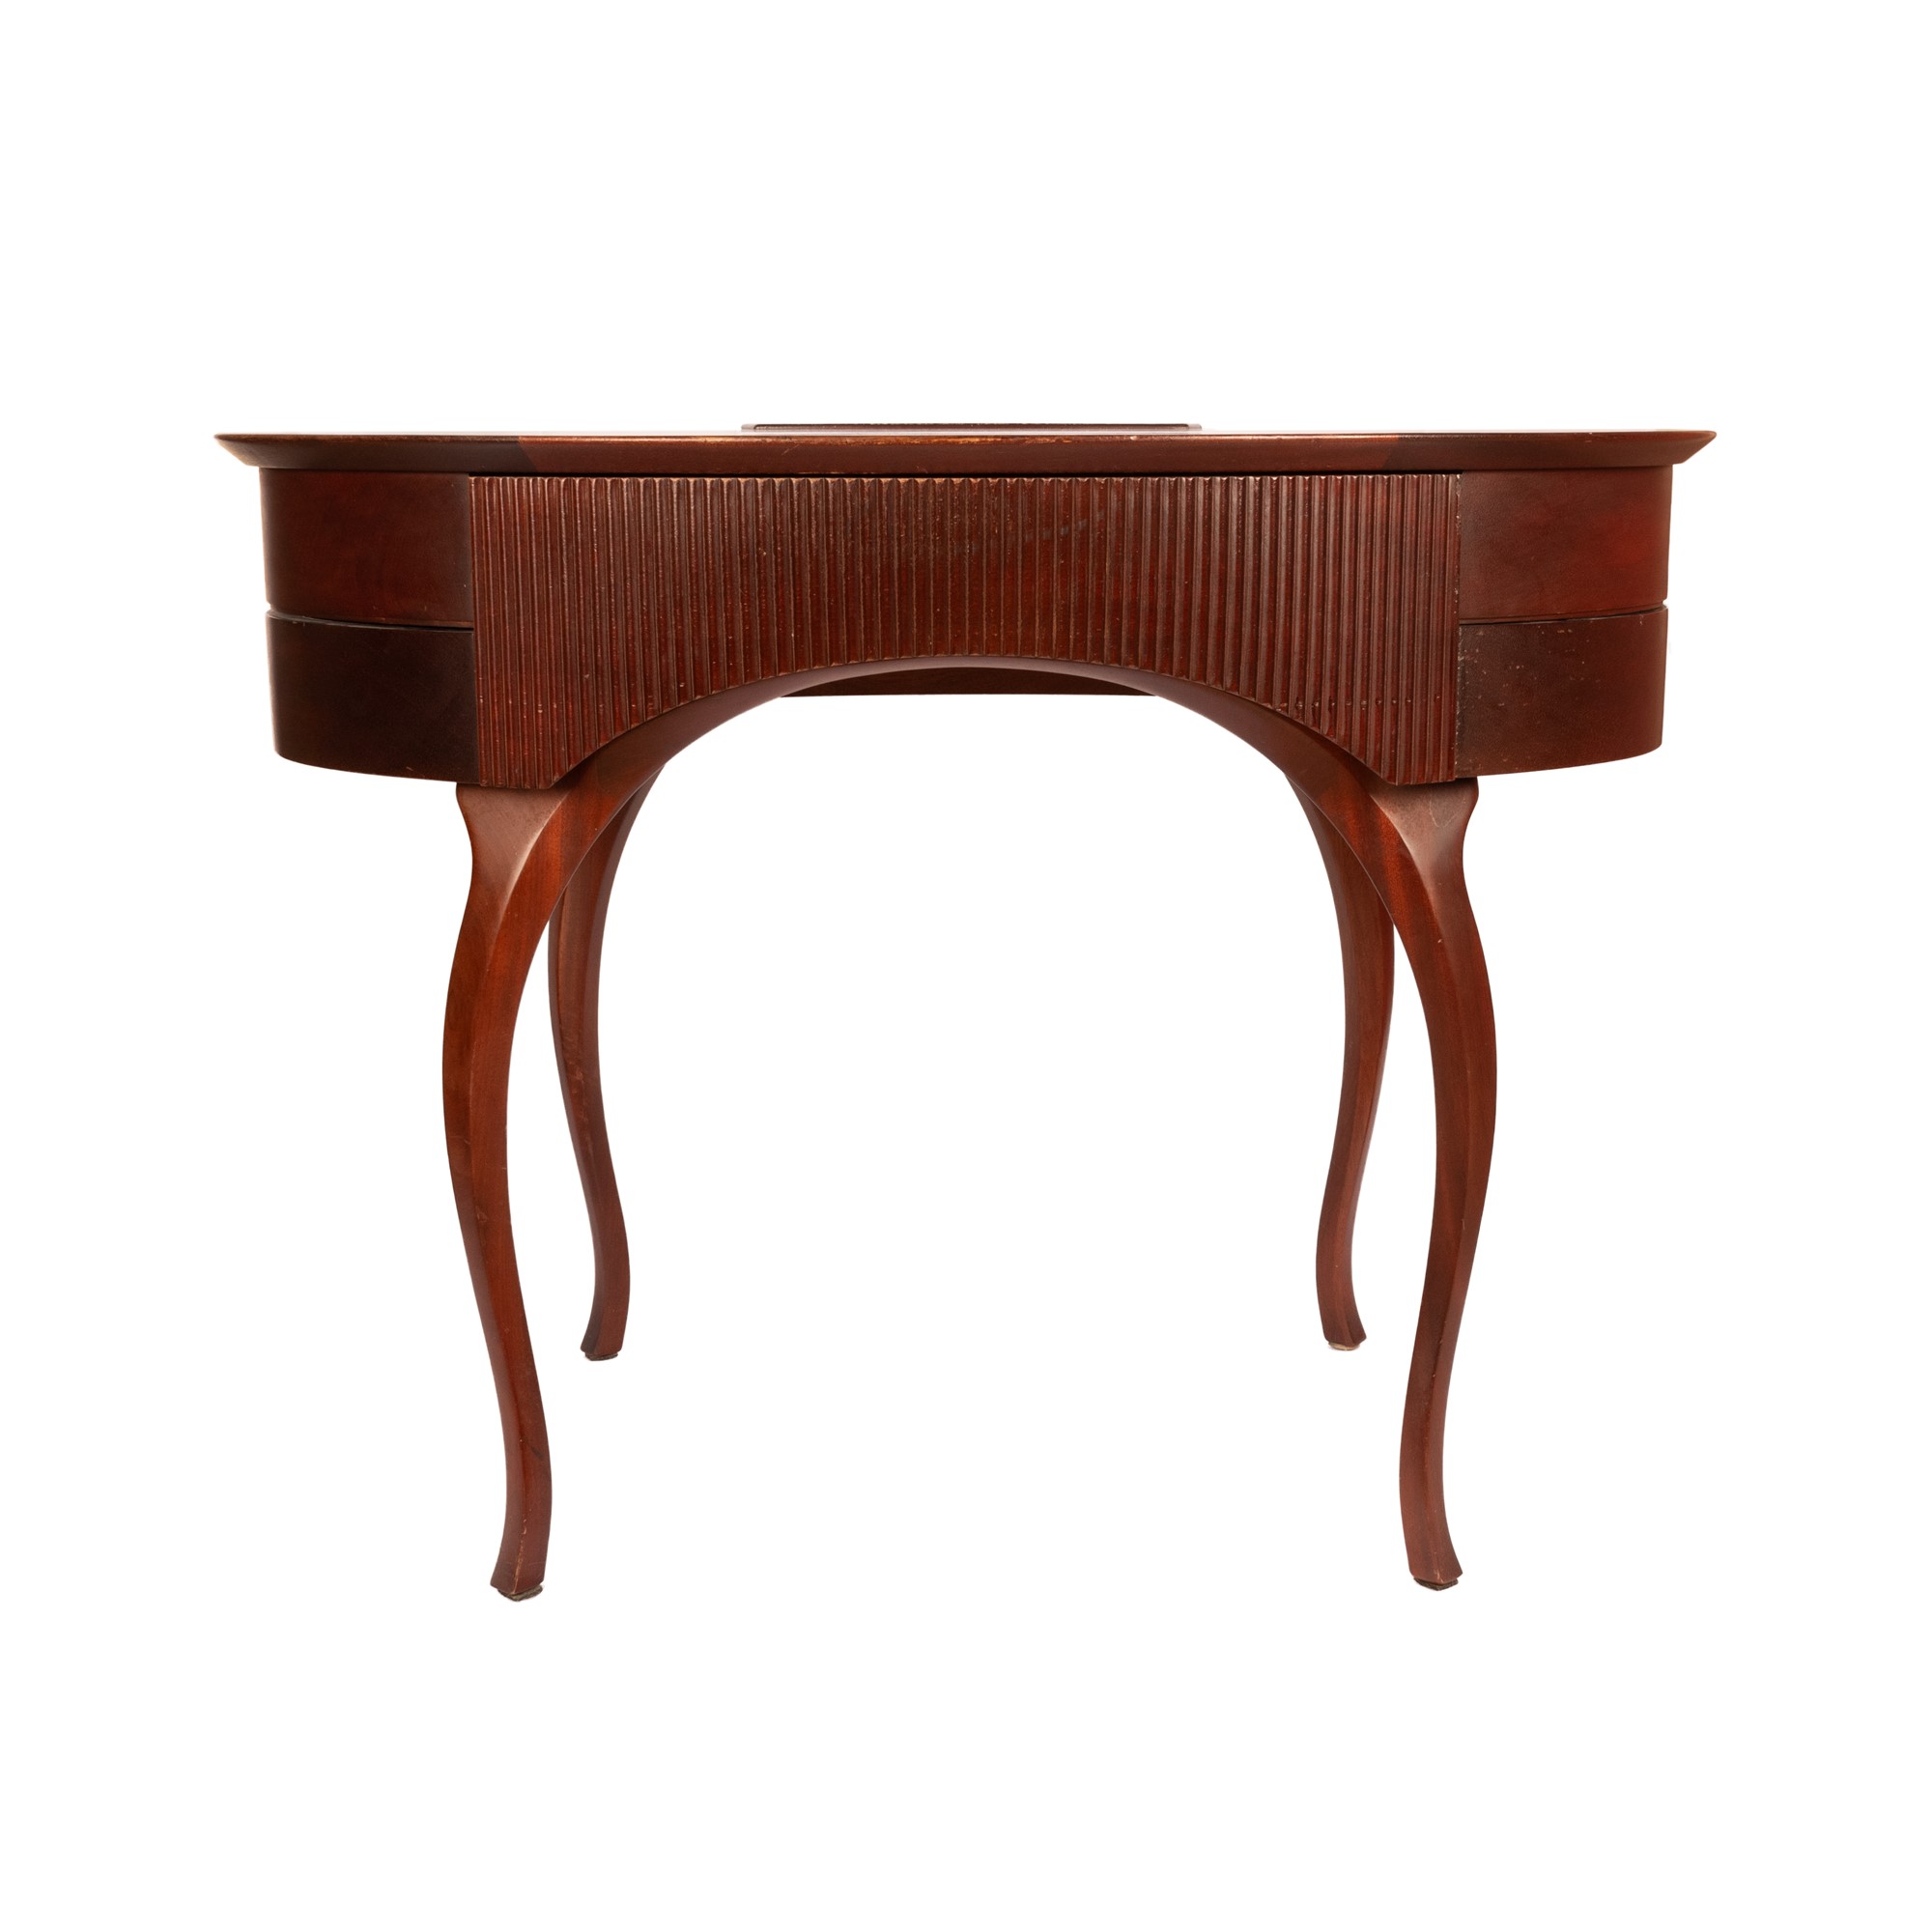 Writing desk in cherry wood - Image 22 of 25